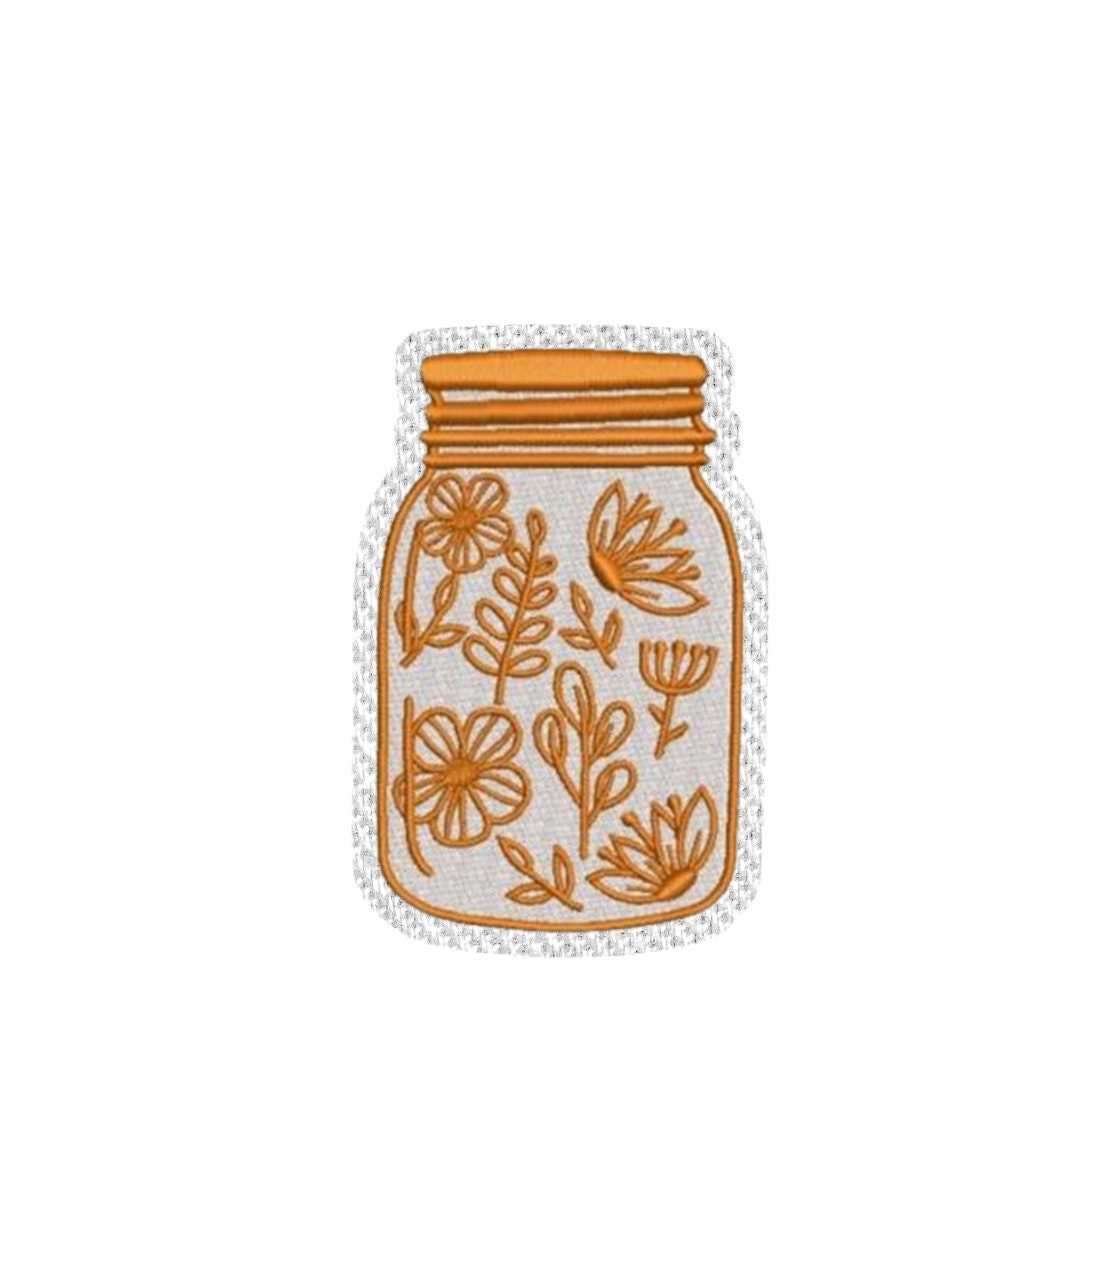 Jar Filled with Flowers Iron on Patch / Sew on embroidered Floral Garden Flowers Embroidery Women Applique Merit Badge for Clothing Jacket